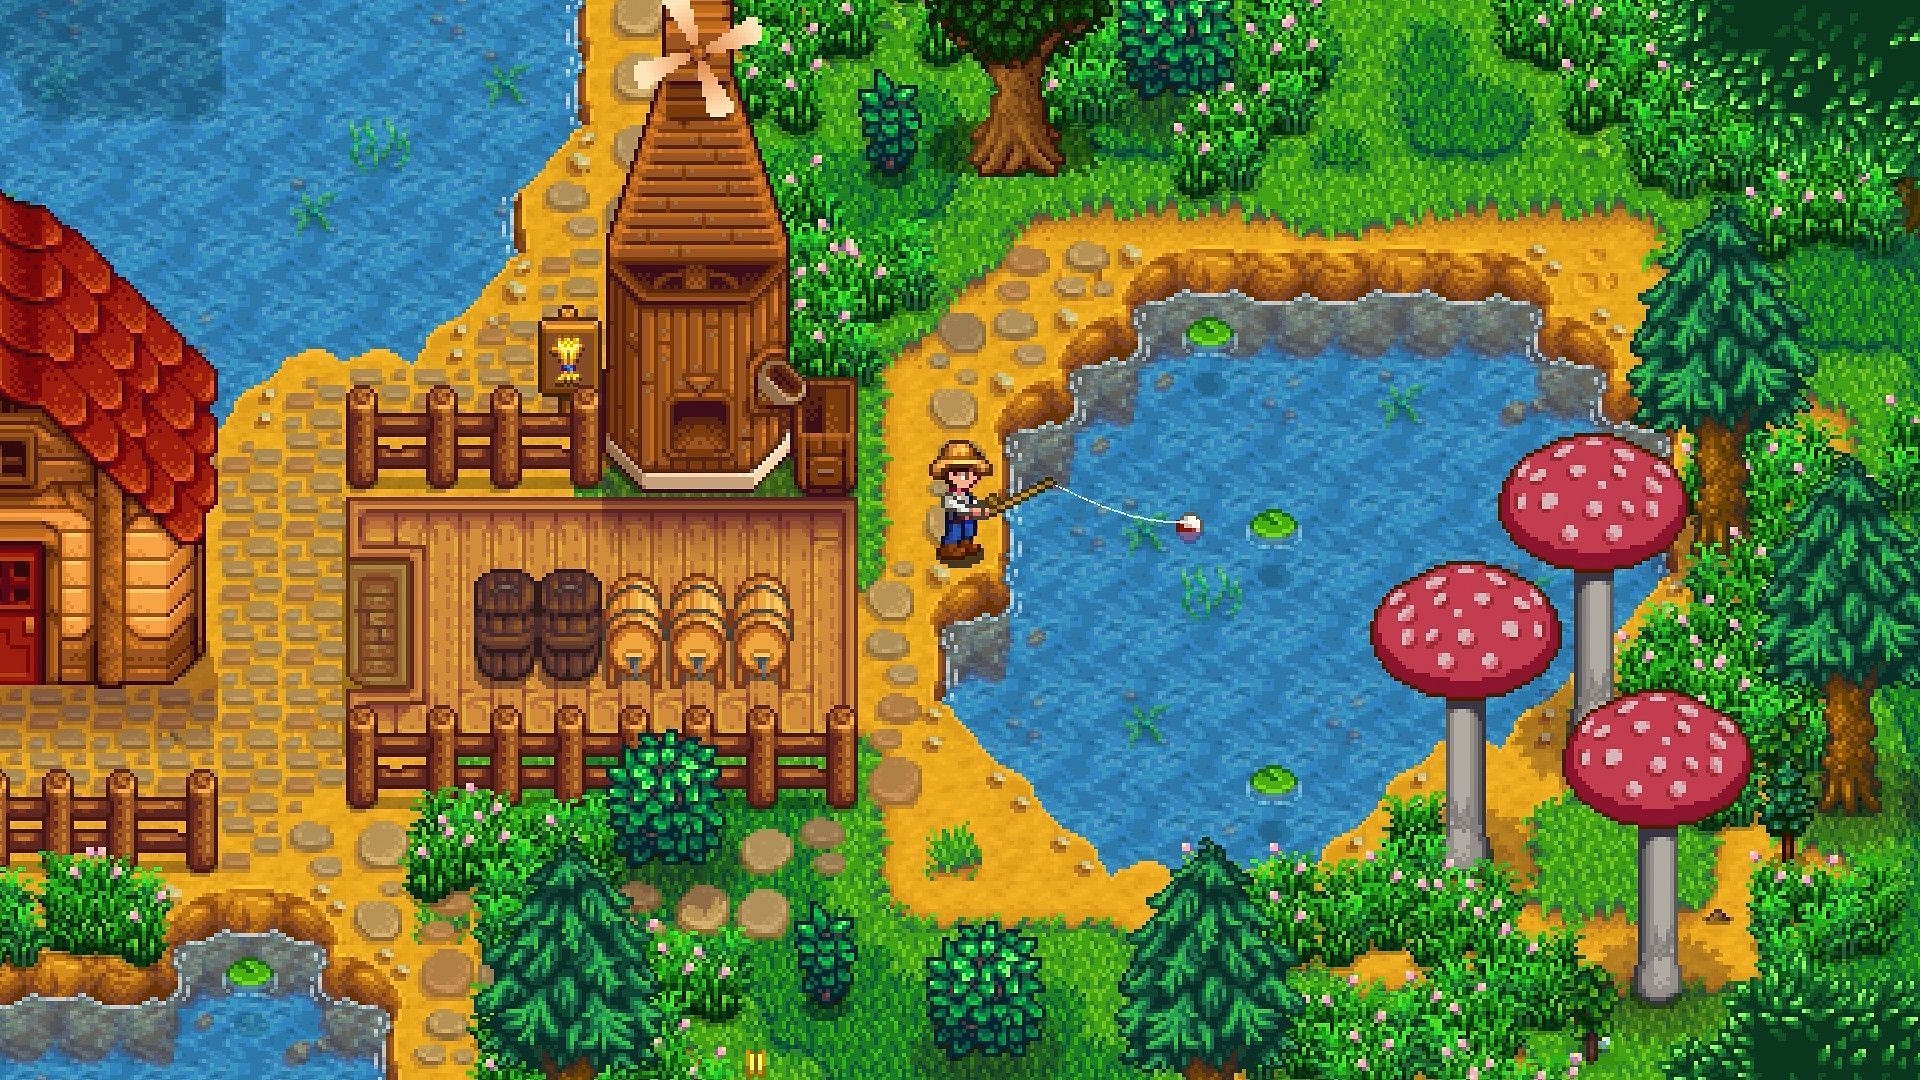 Regardless of the rod picked, fishing is a game of patience (Image via ConcernedApe)